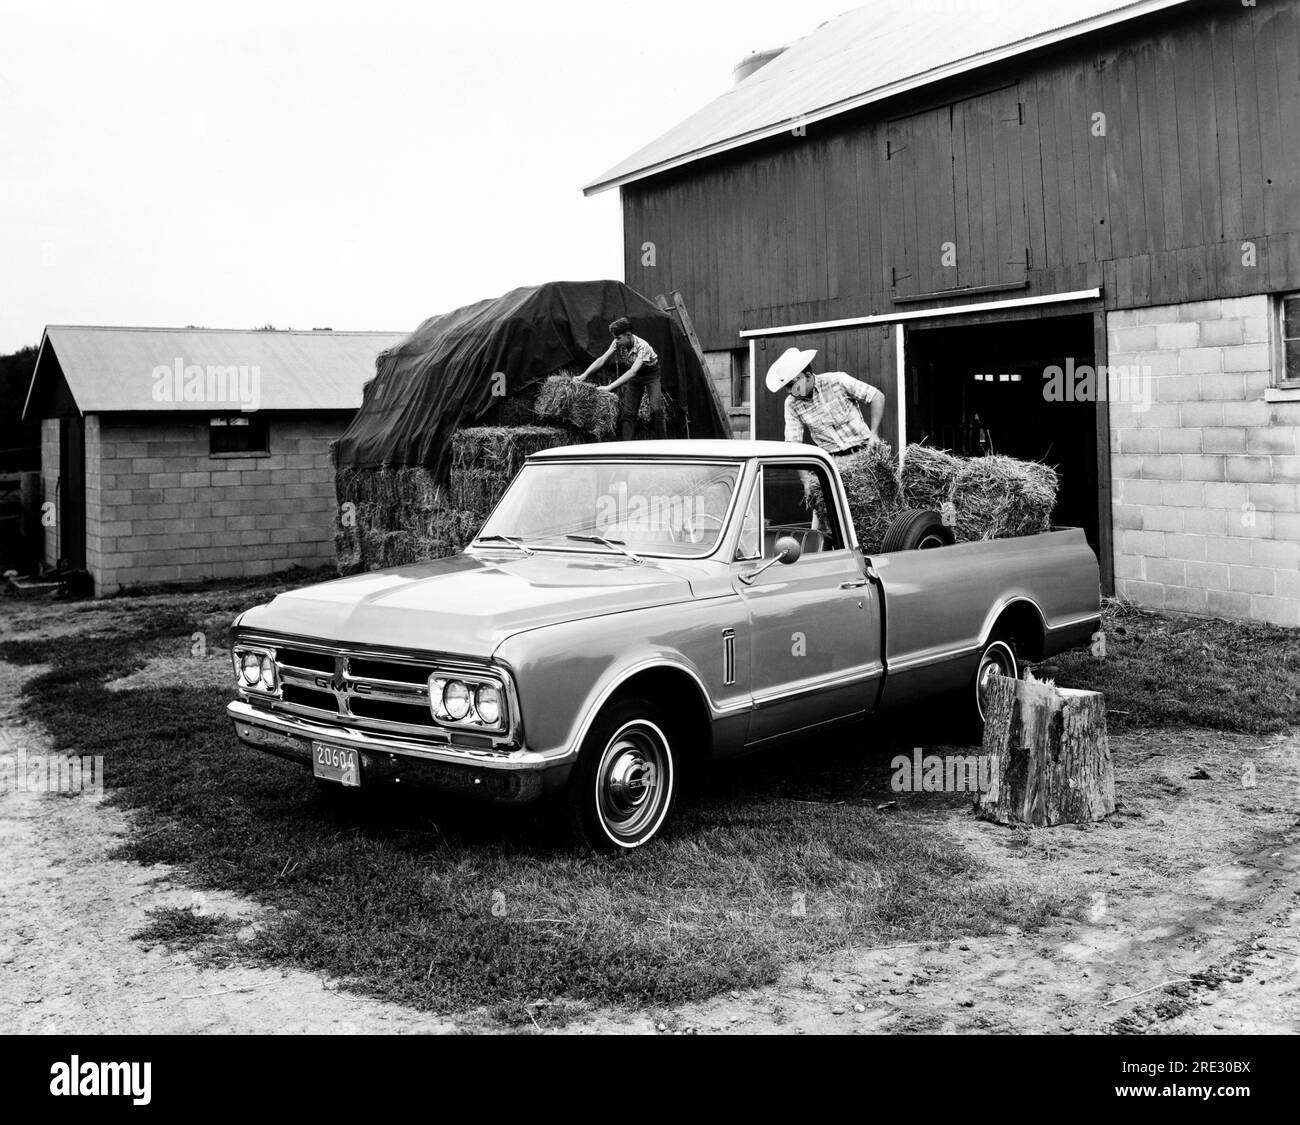 United States   1967 A farmer loading bales of hay into his new GMC light duty pickup truck. Stock Photo